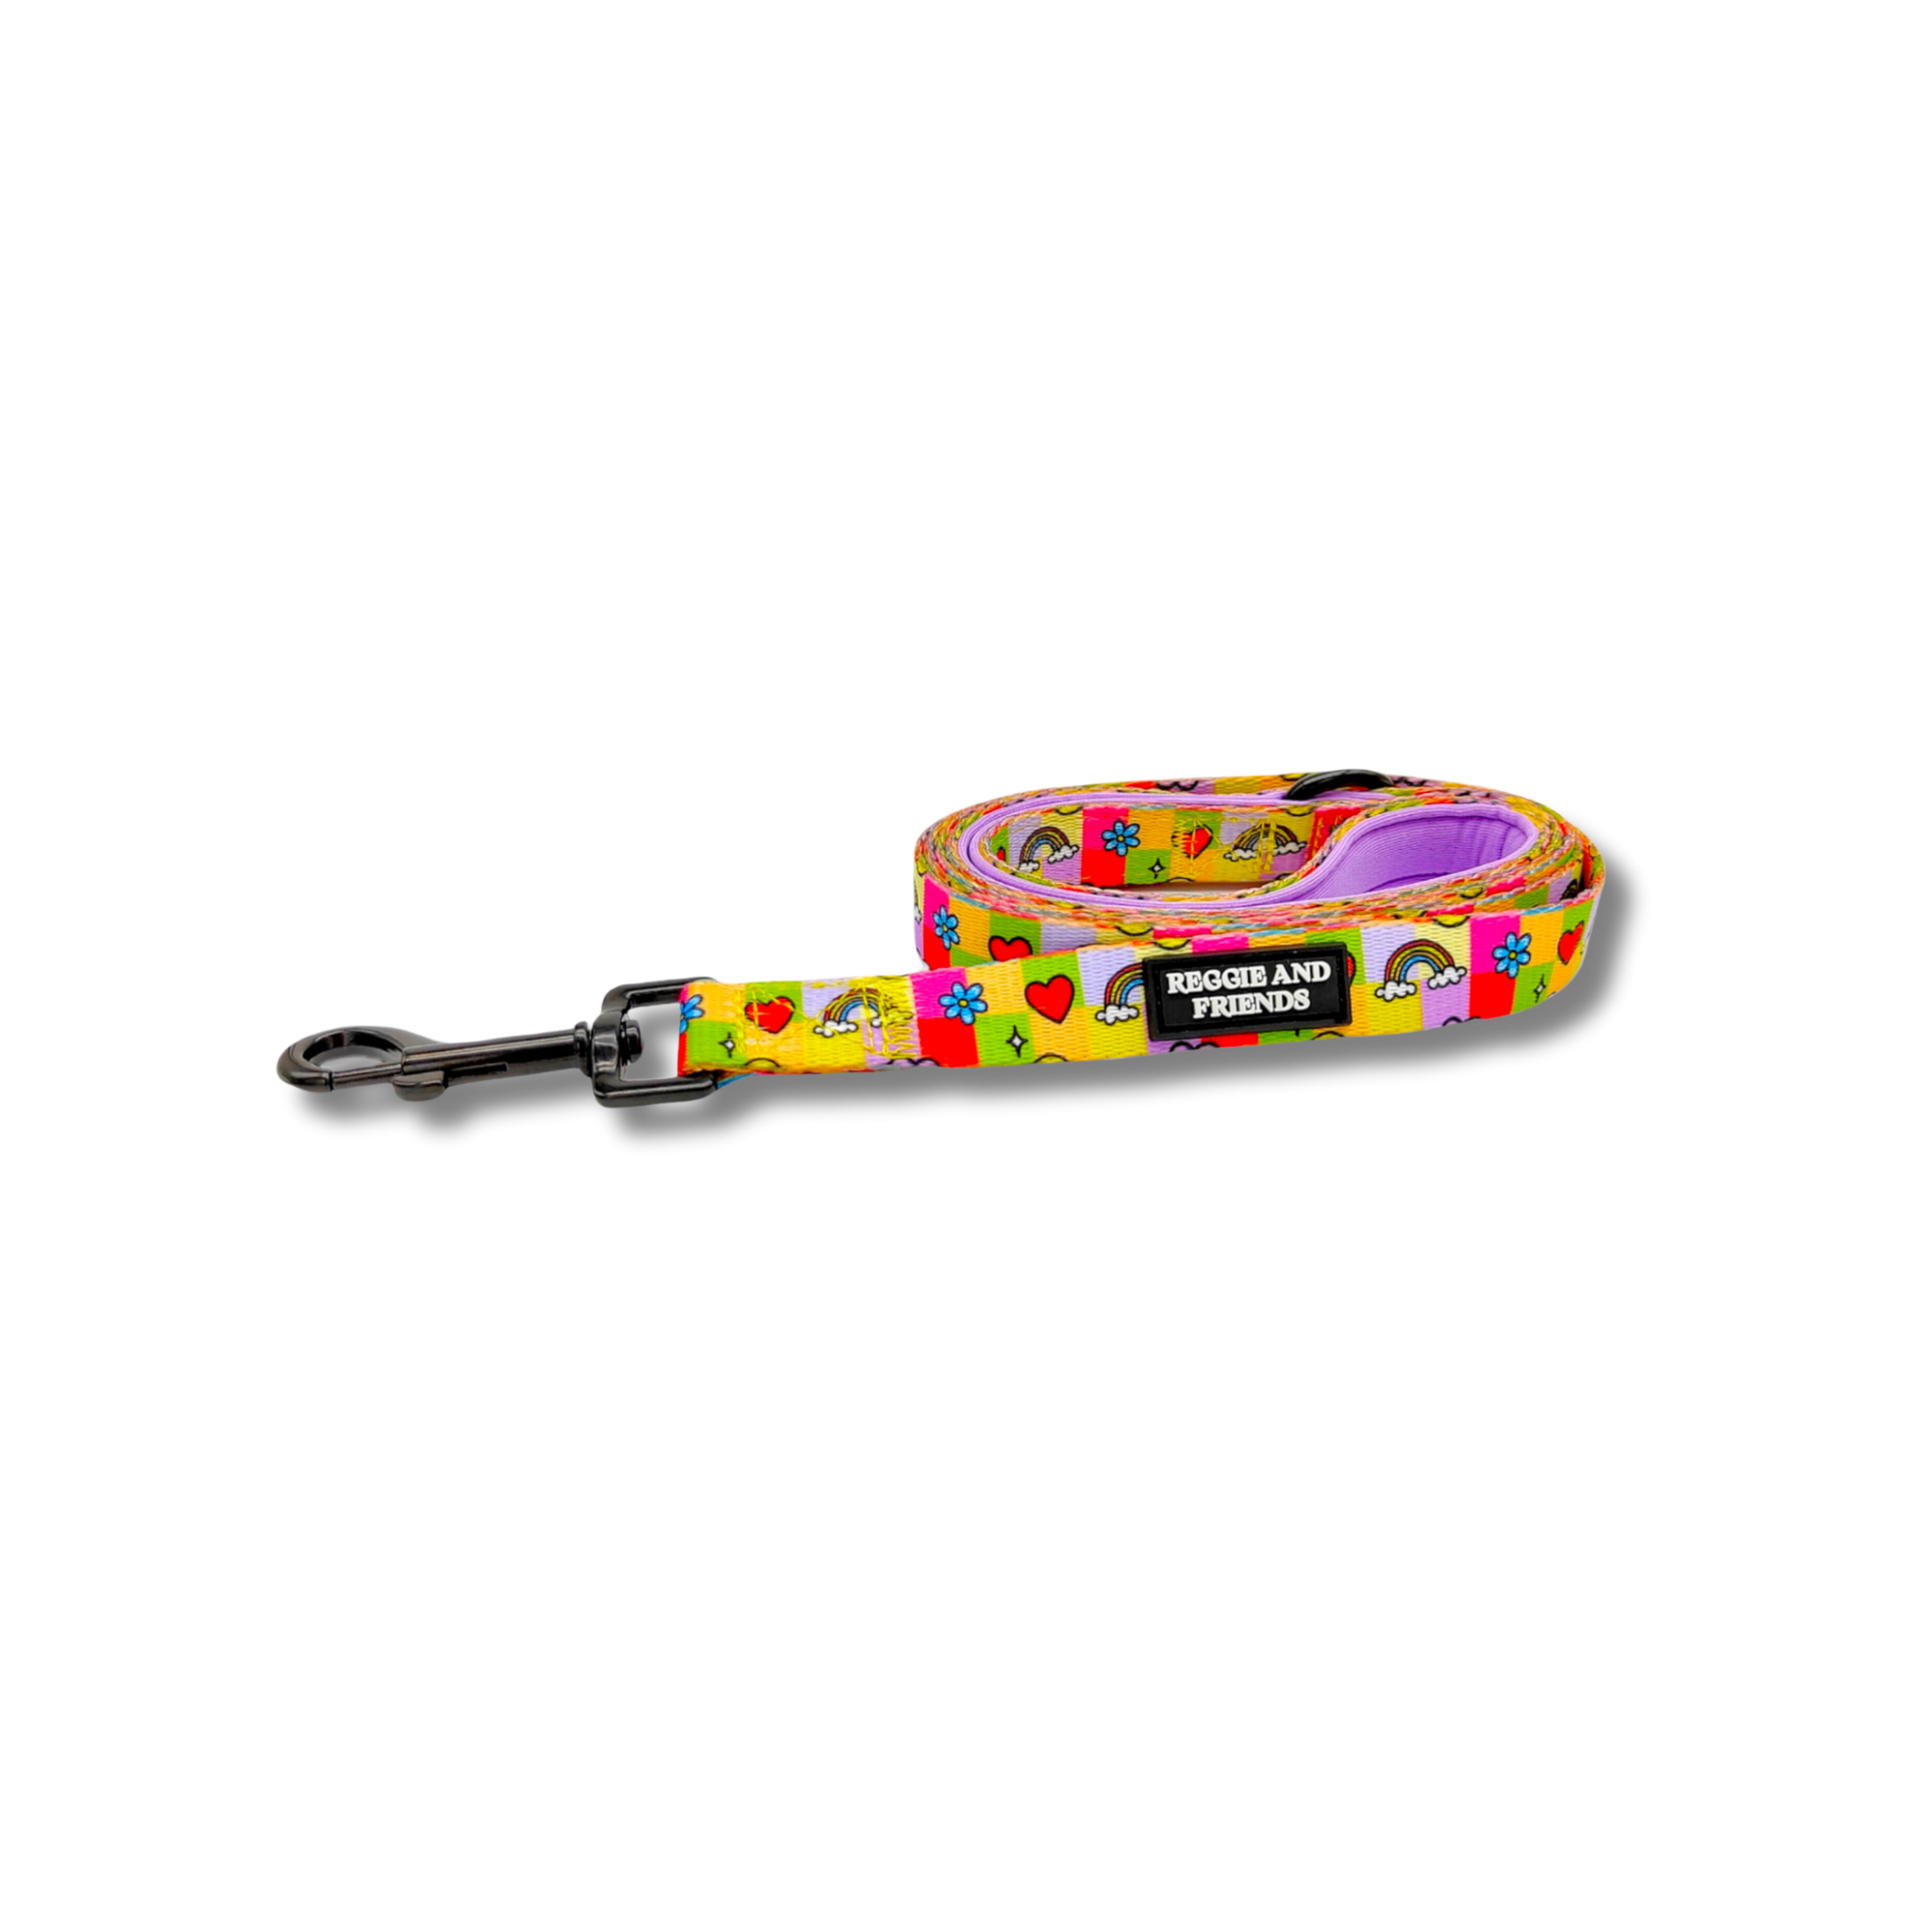 Colourful Leash for pets - Reggie and Friends